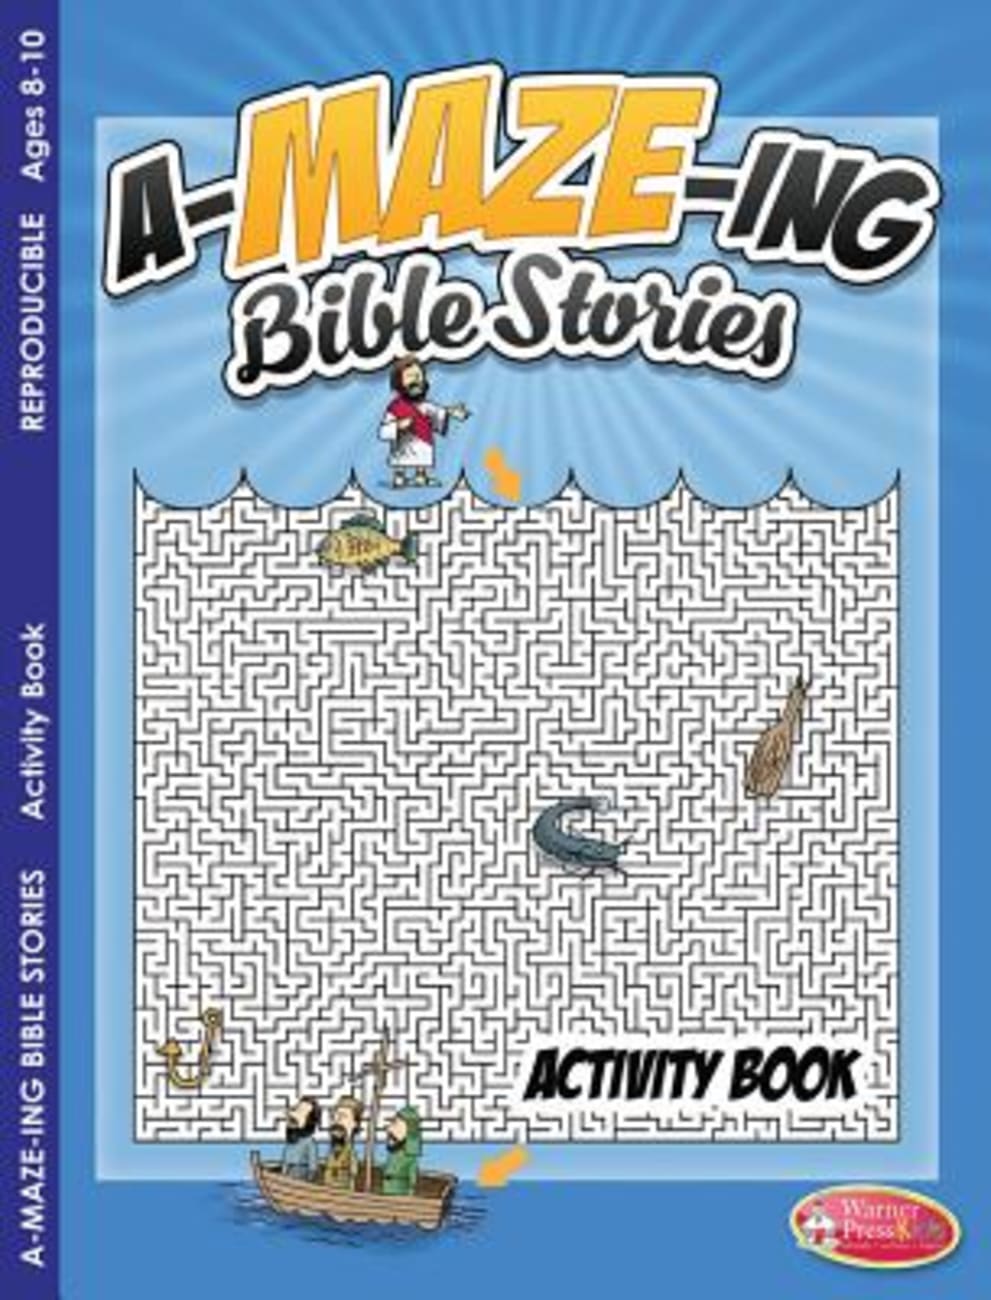 A-Maze-Ing Bible Stories Activity Book (Ages 8-10, Reproducible) (Warner Press Colouring & Activity Books Series) Paperback